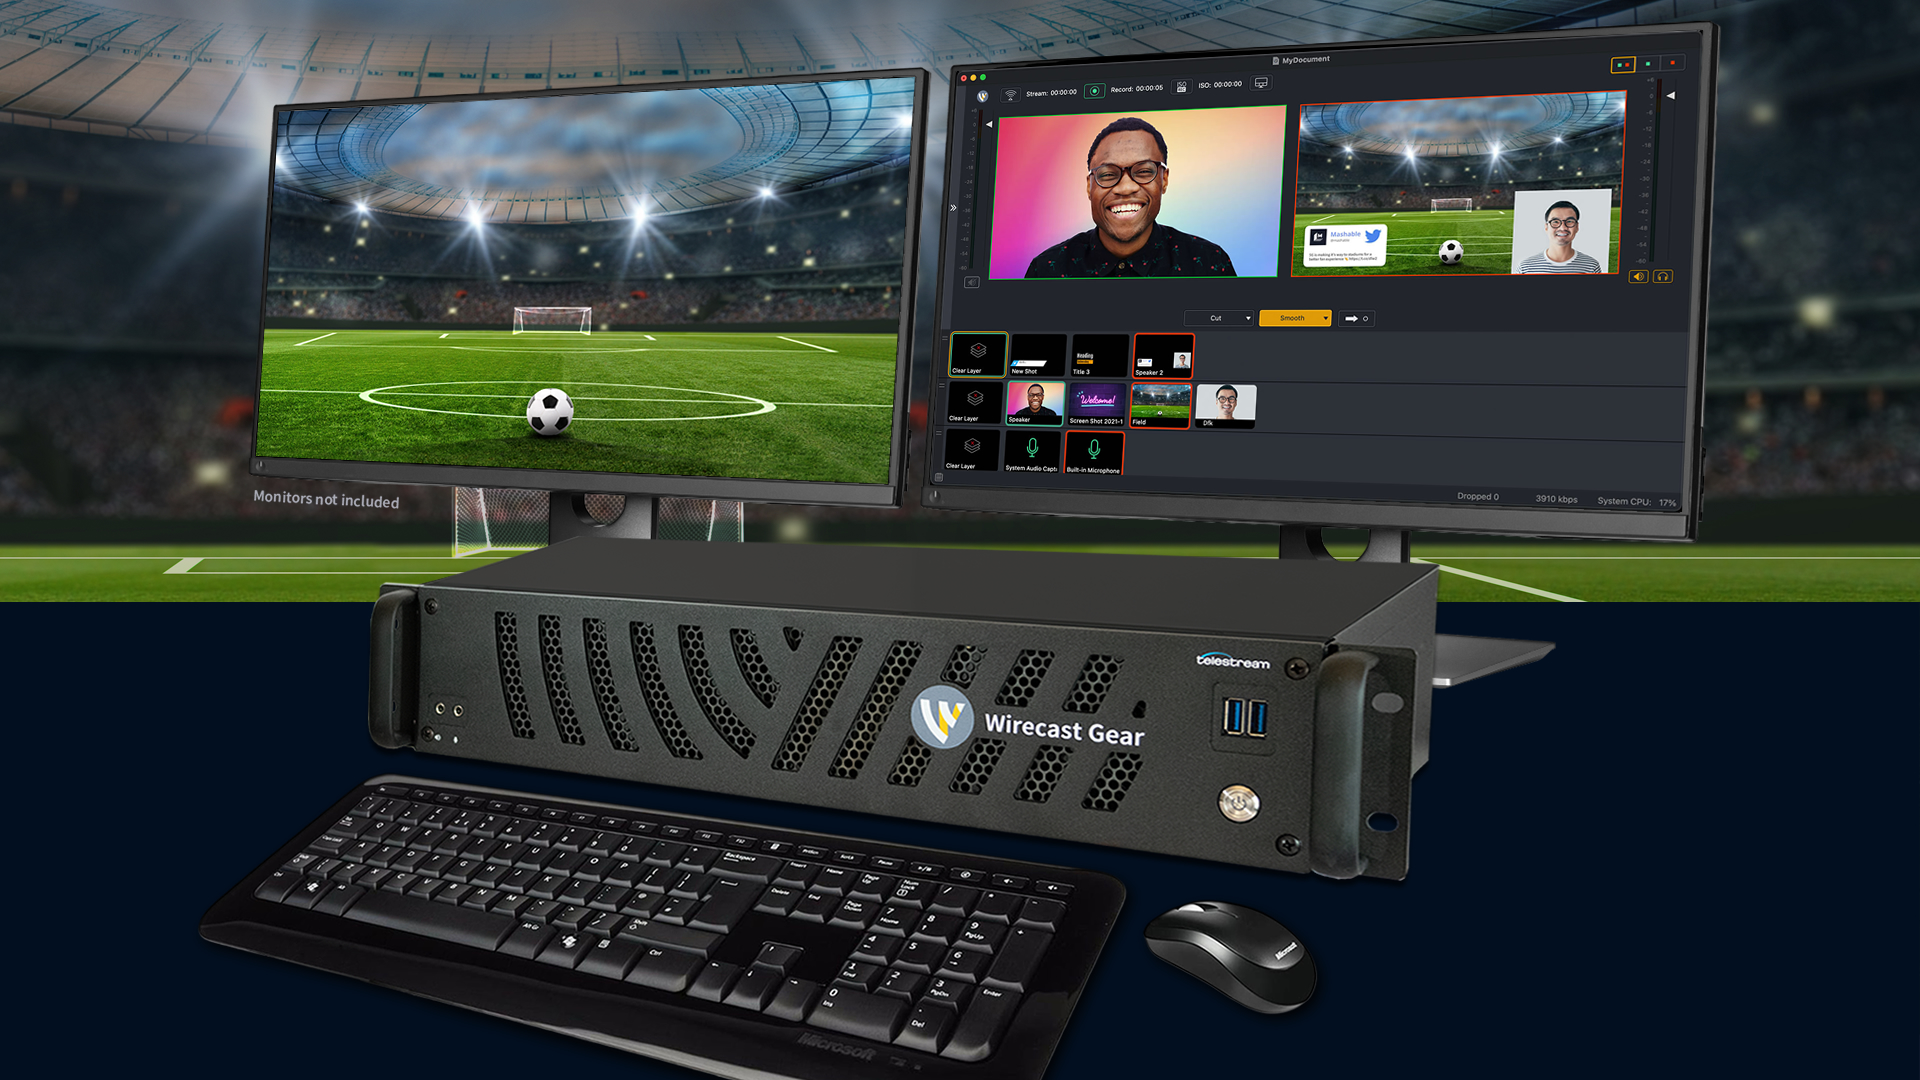 Telestream Announces New Wirecast Gear 1080P and 4K Streaming Hardware Solutions